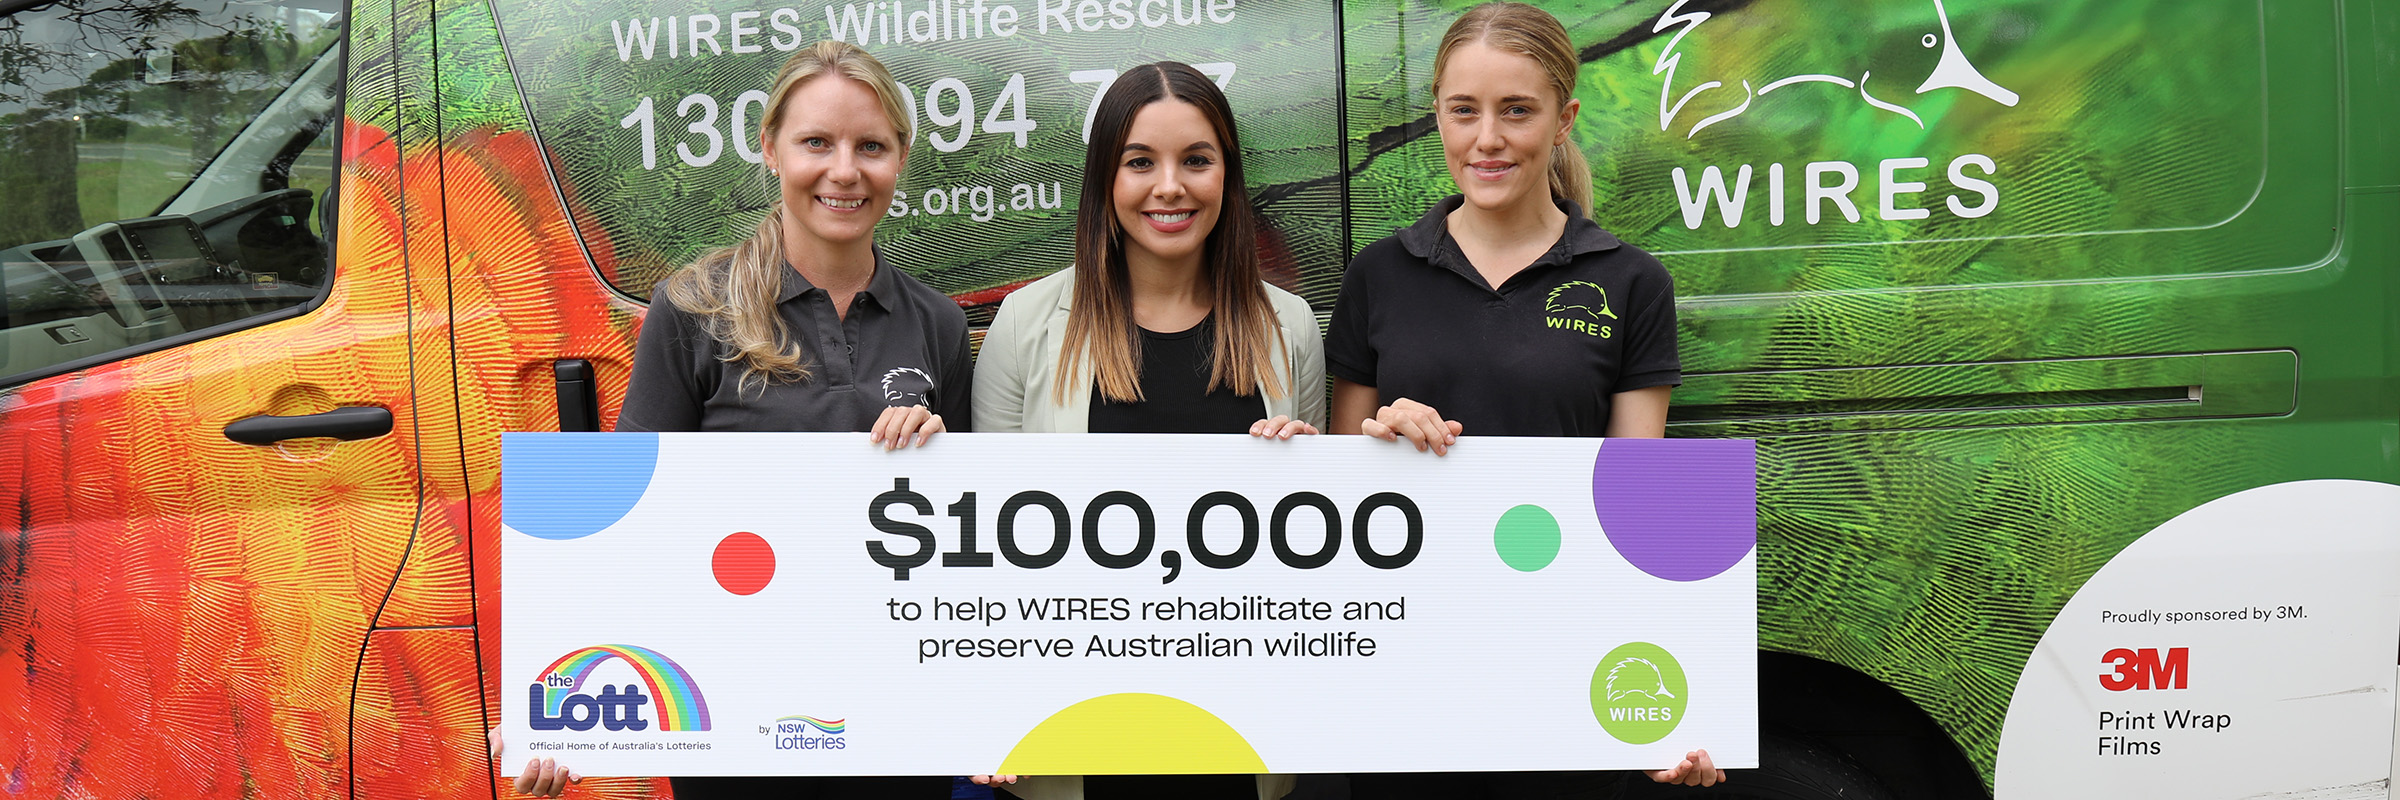 Our $100,000 donation to help save more koalas Hero Image